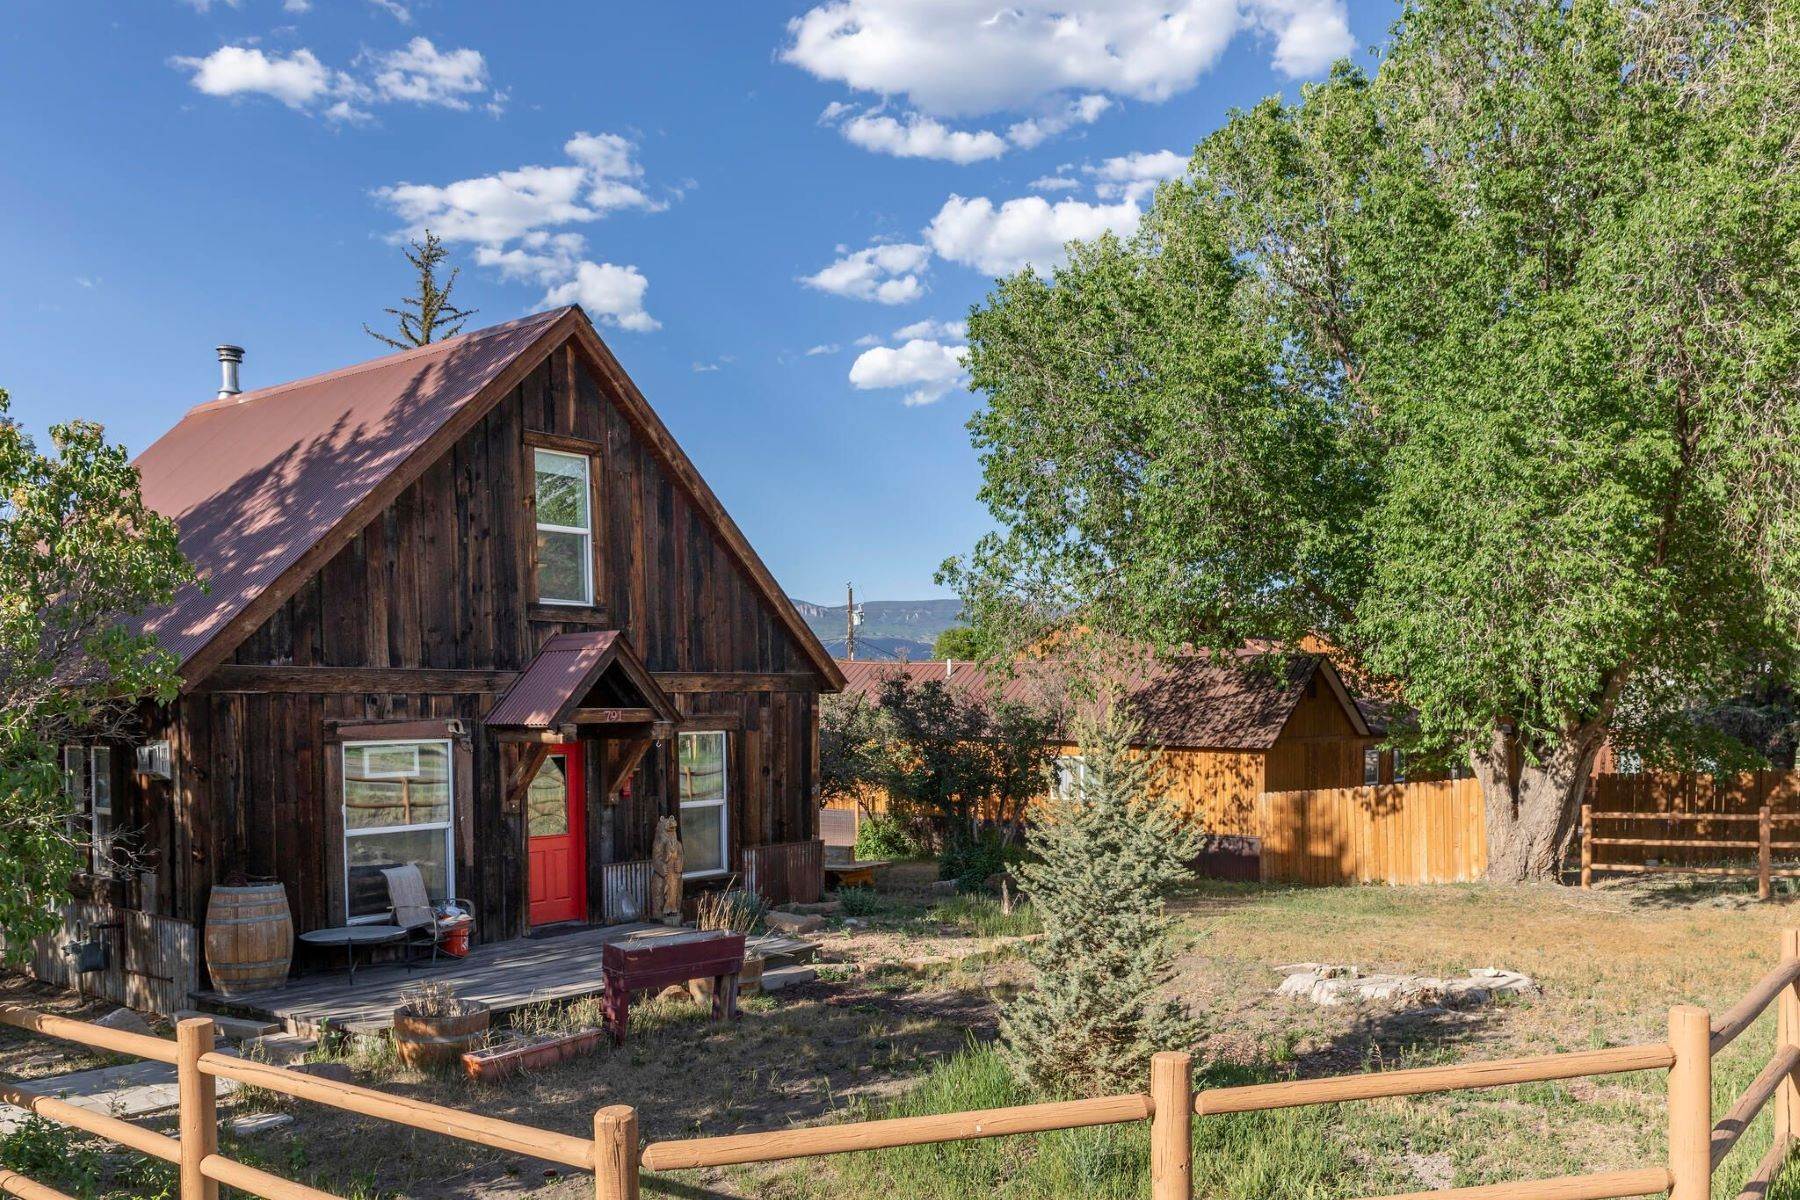 Other Residential Homes for Active at 791 Sherman Street, Ridgway, CO, 81432 791 Sherman Street Ridgway, Colorado 81432 United States